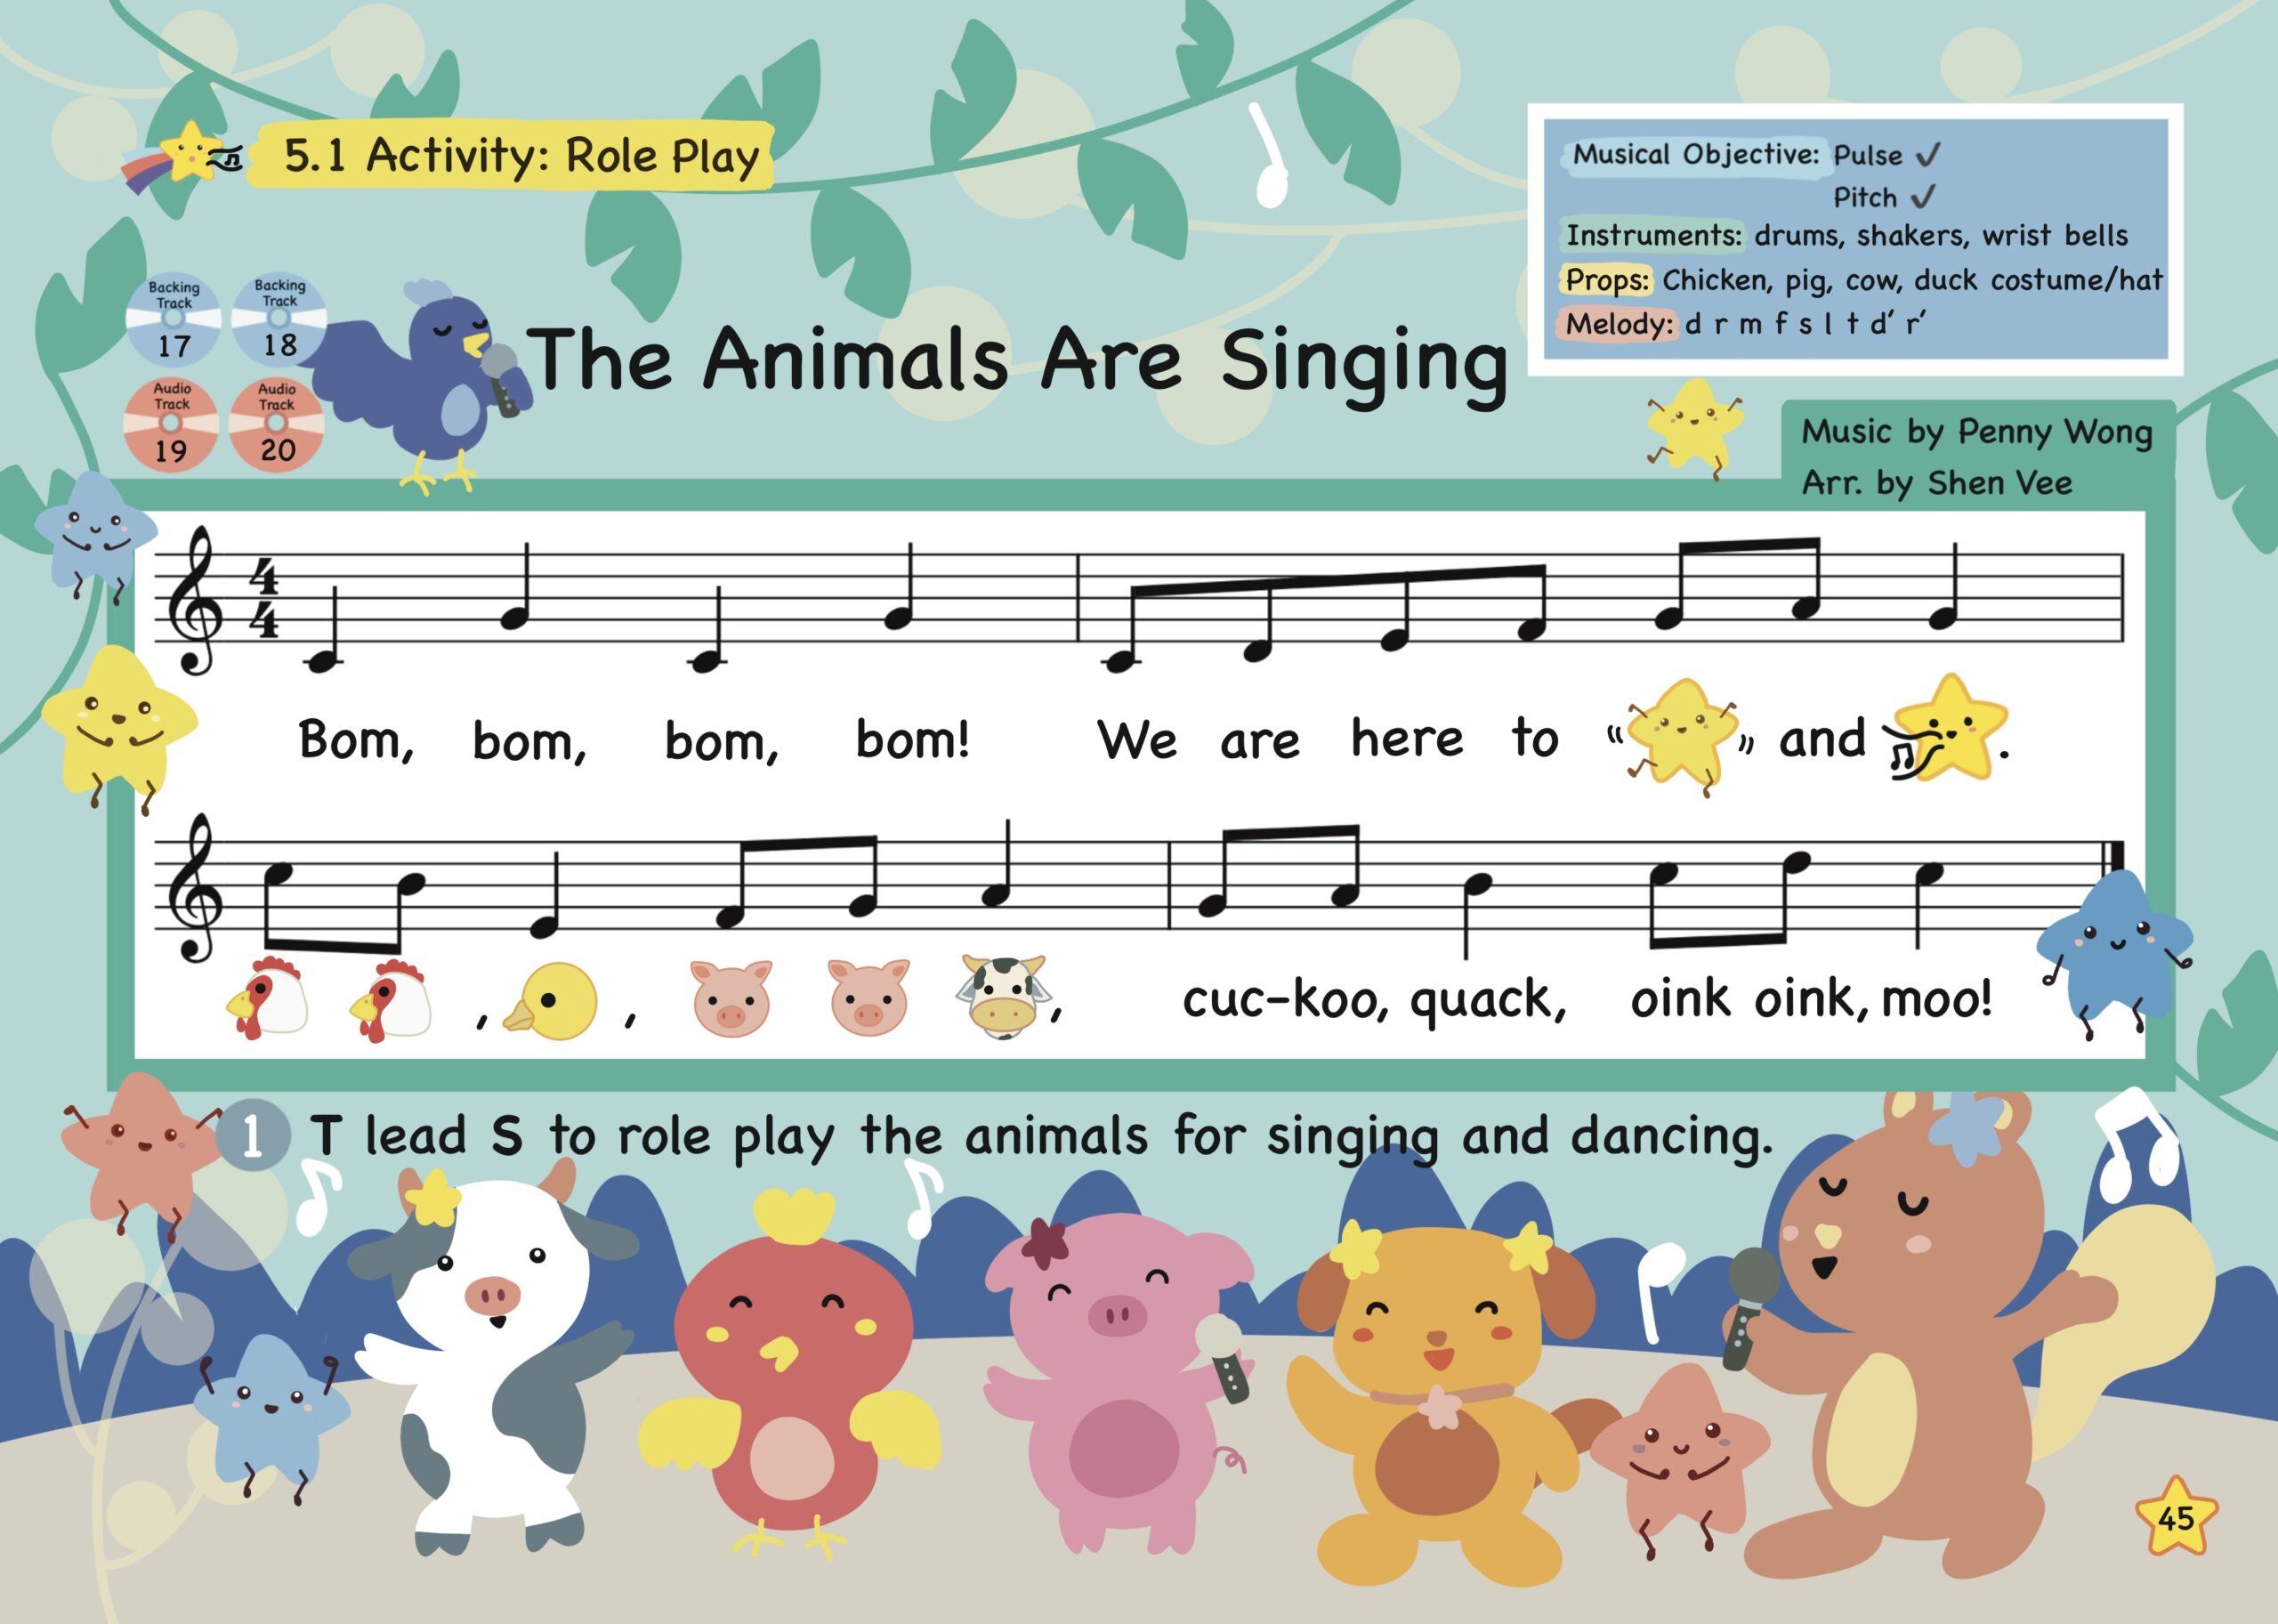 5.1_The_Animals_Are_Singing